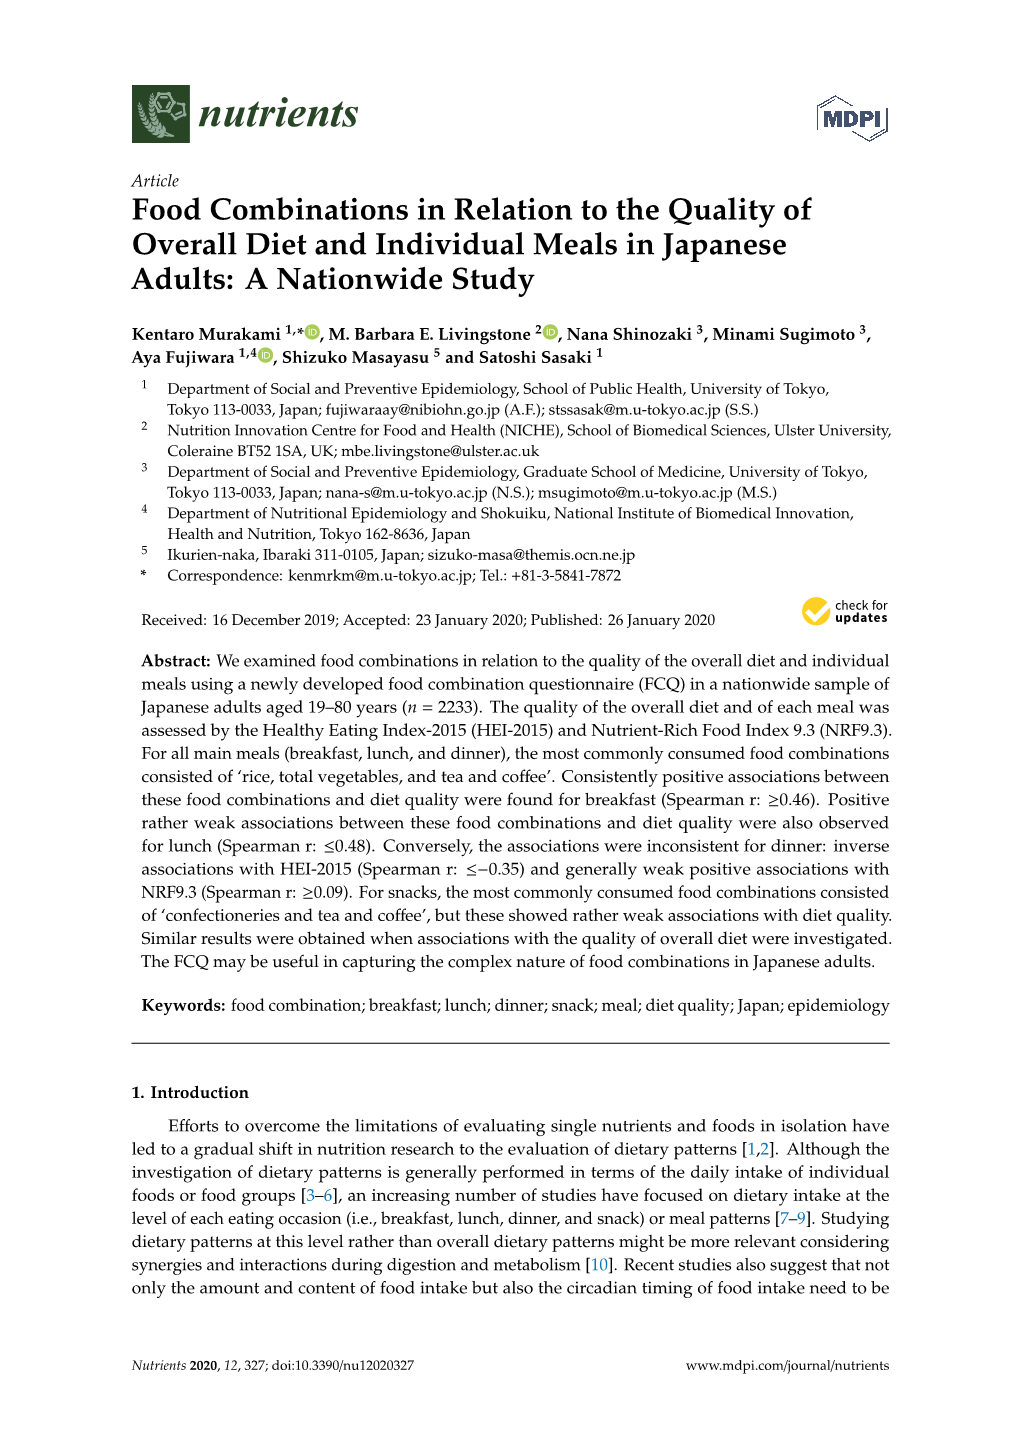 Food Combinations in Relation to the Quality of Overall Diet and Individual Meals in Japanese Adults: a Nationwide Study